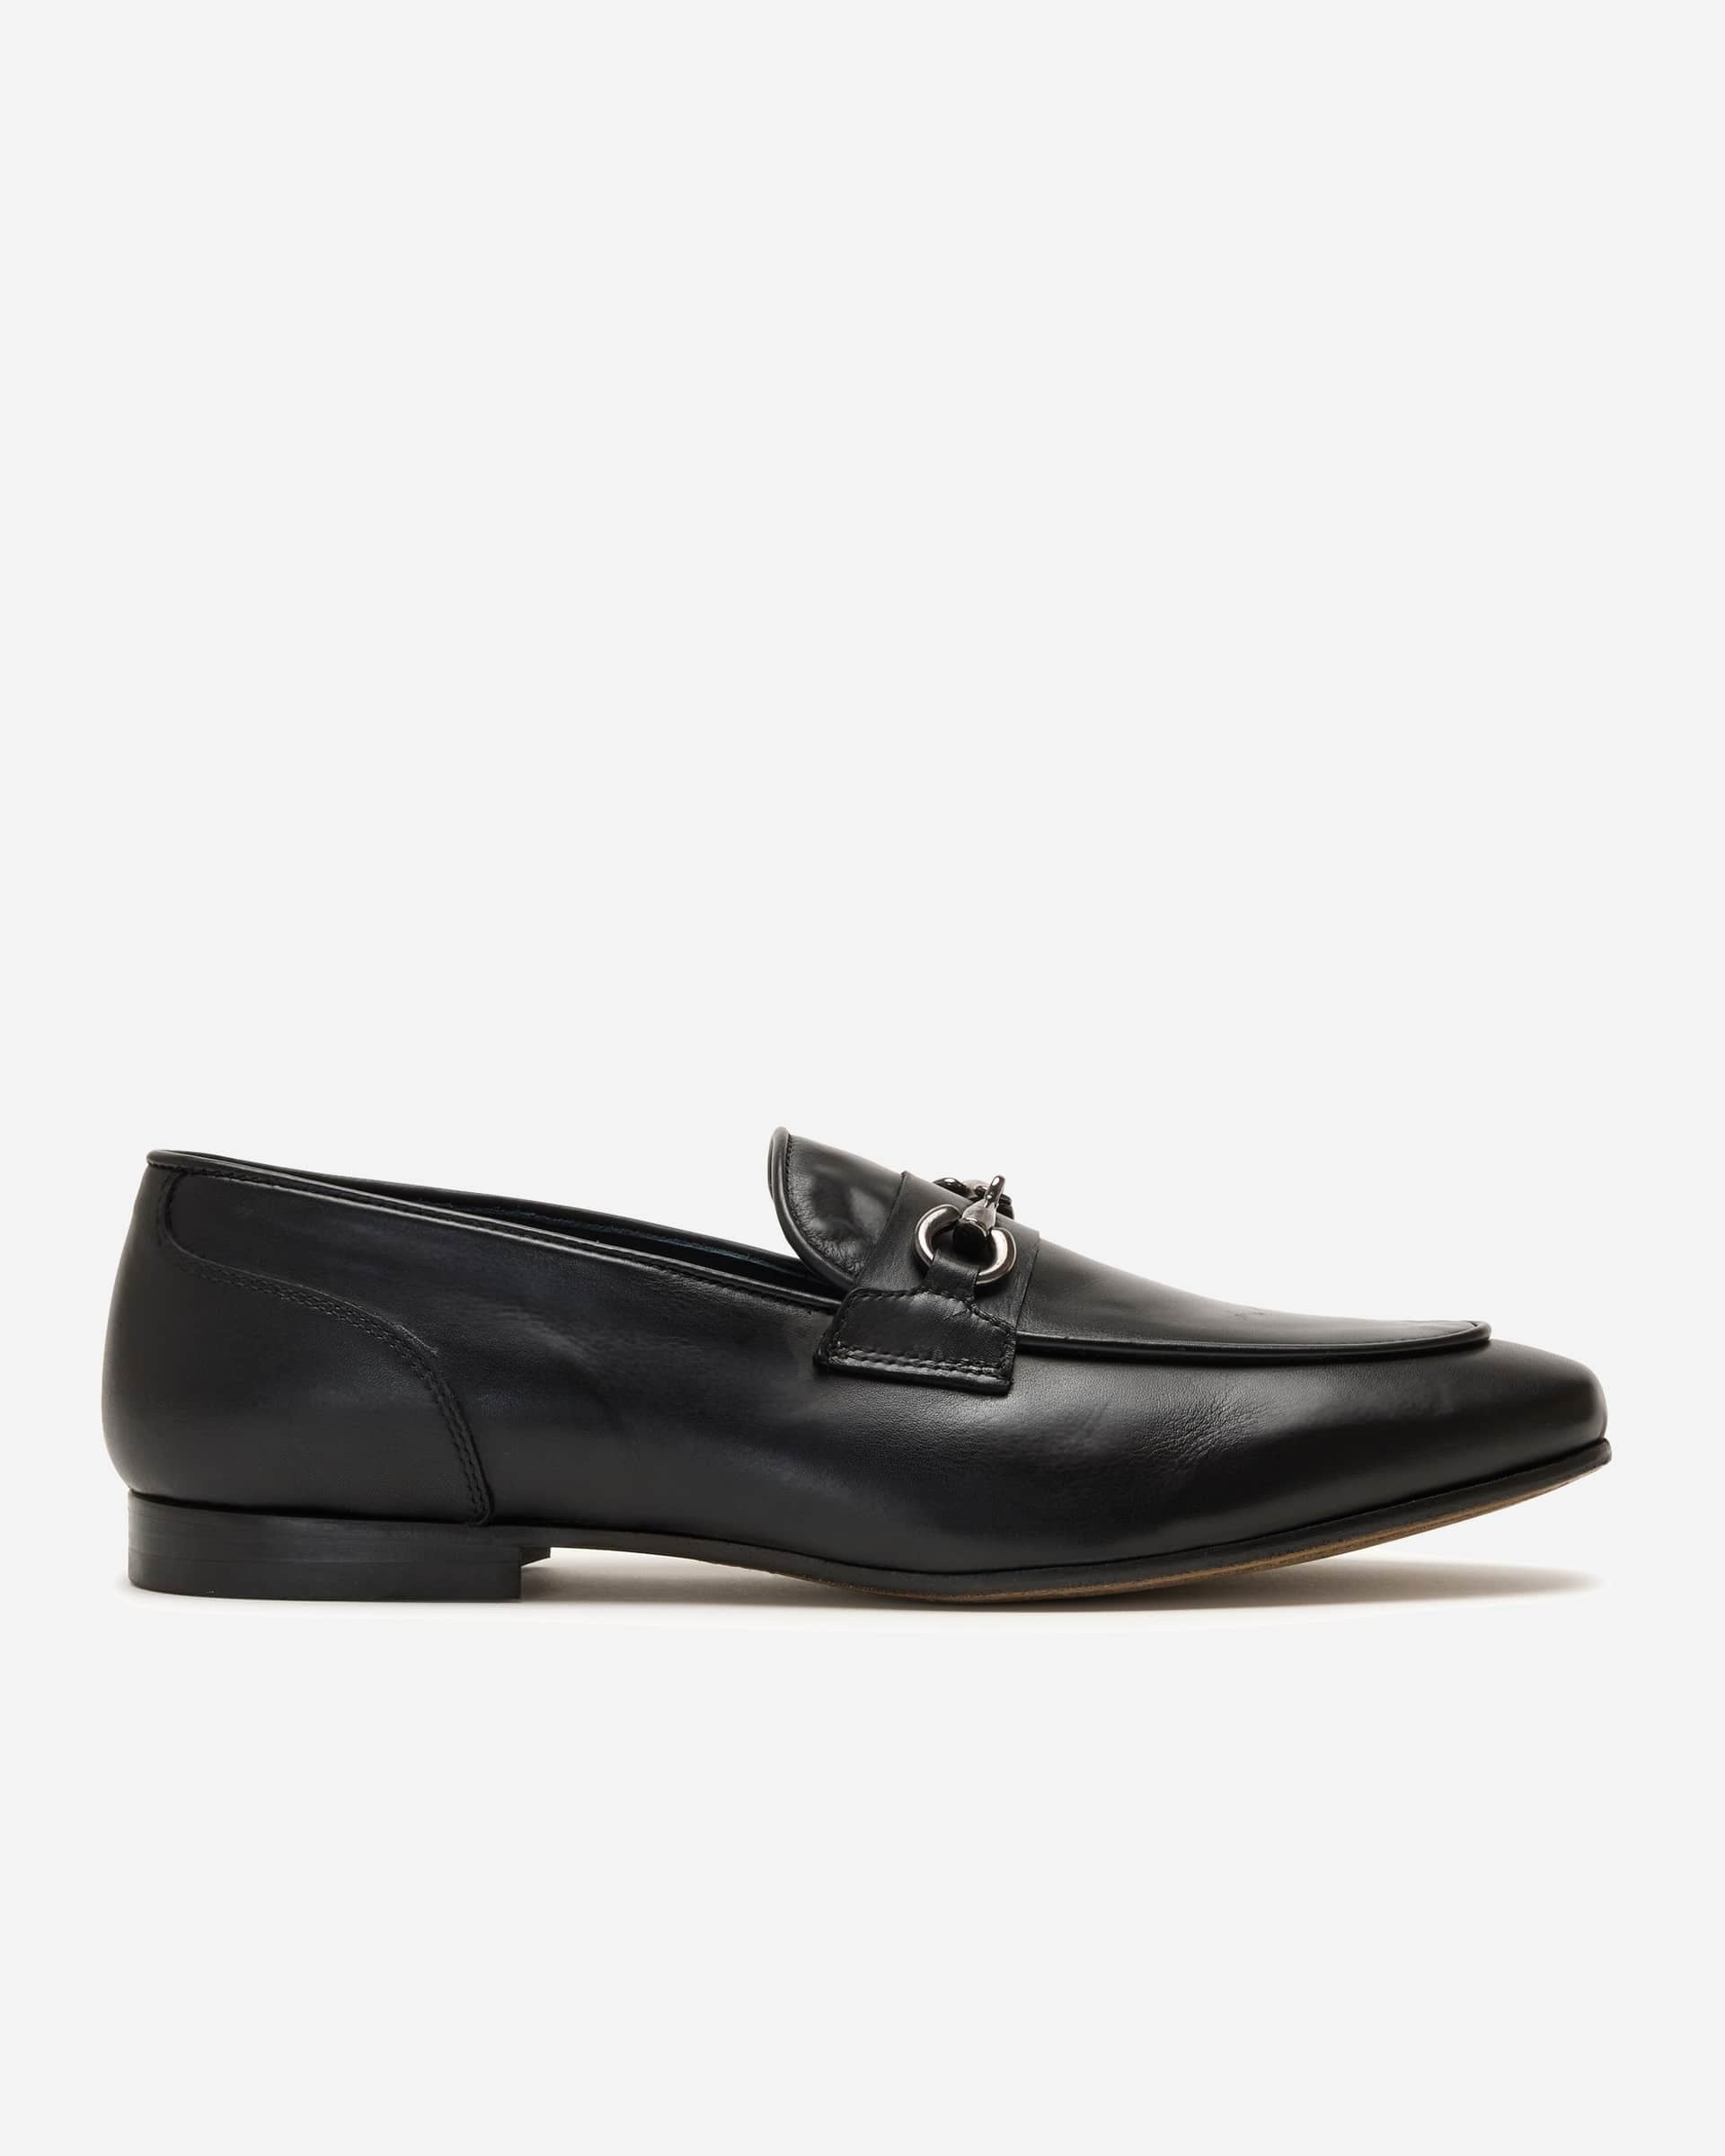 Horsebit Penny Loafers - Men's Loafers at Menzclub